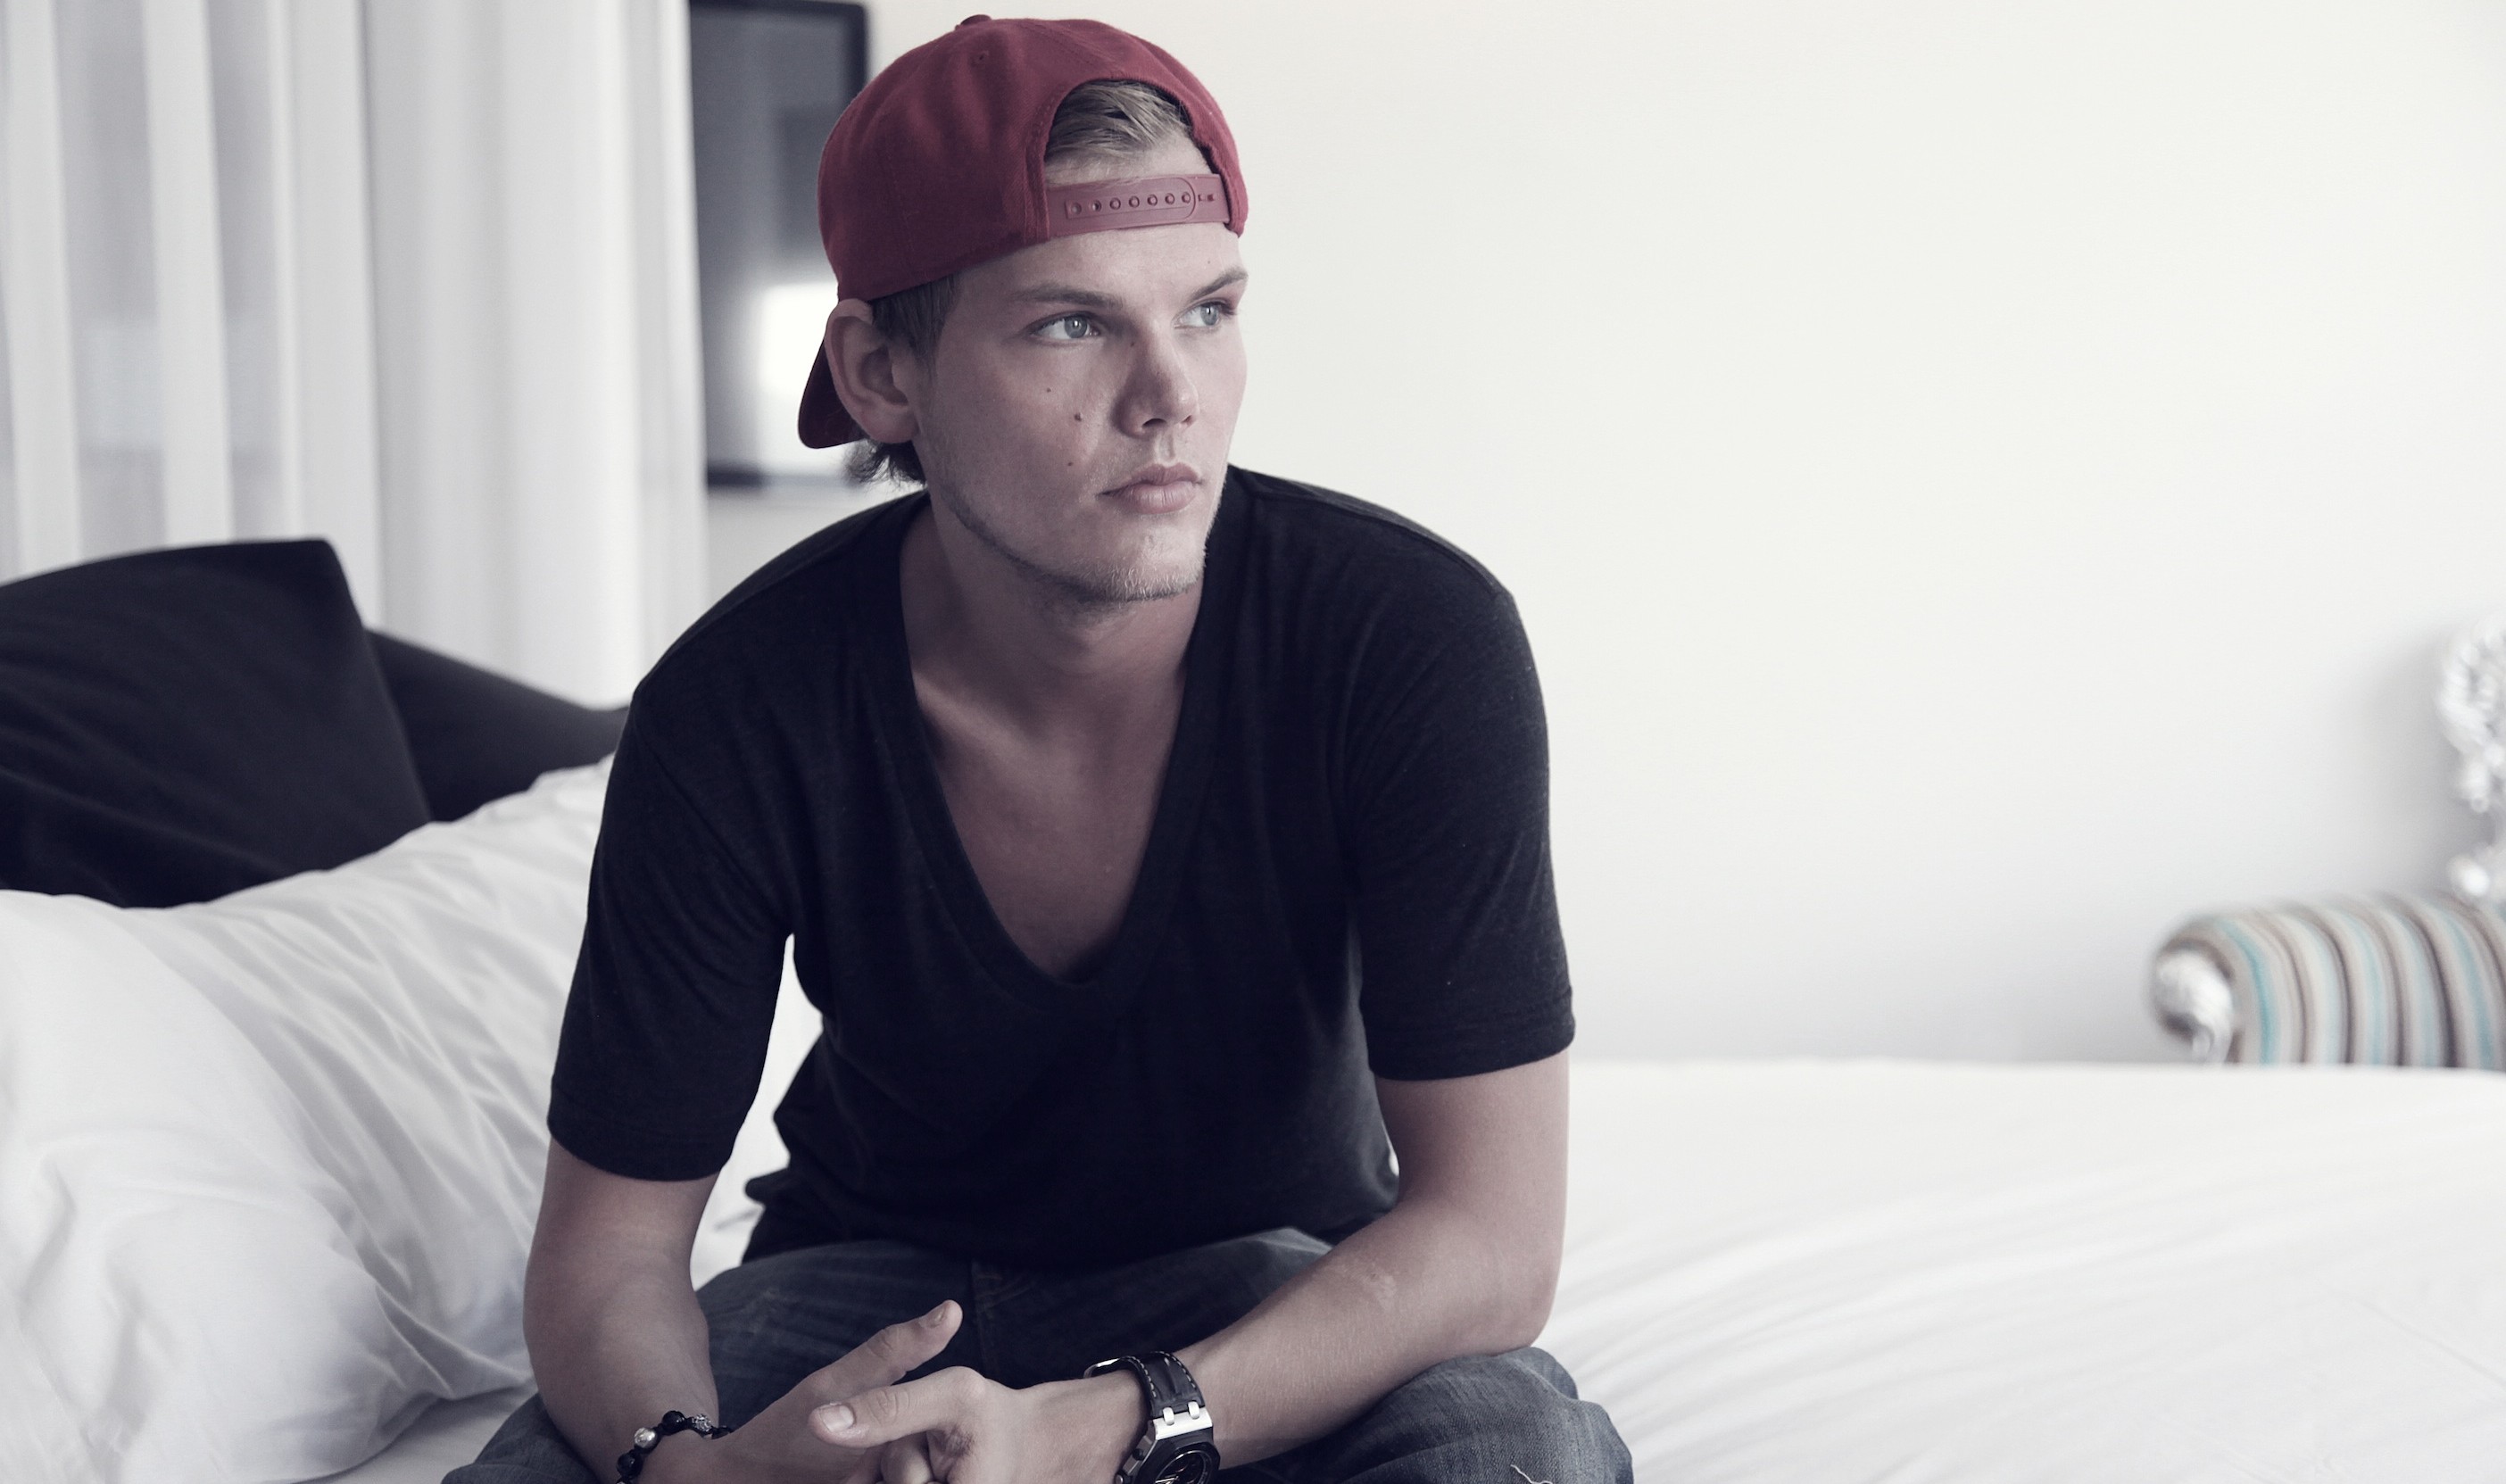 Tim Bergling Avicii Musician Wallpaper Hd Music 4k Wallpapers Images Photos And Background Wallpapers Den